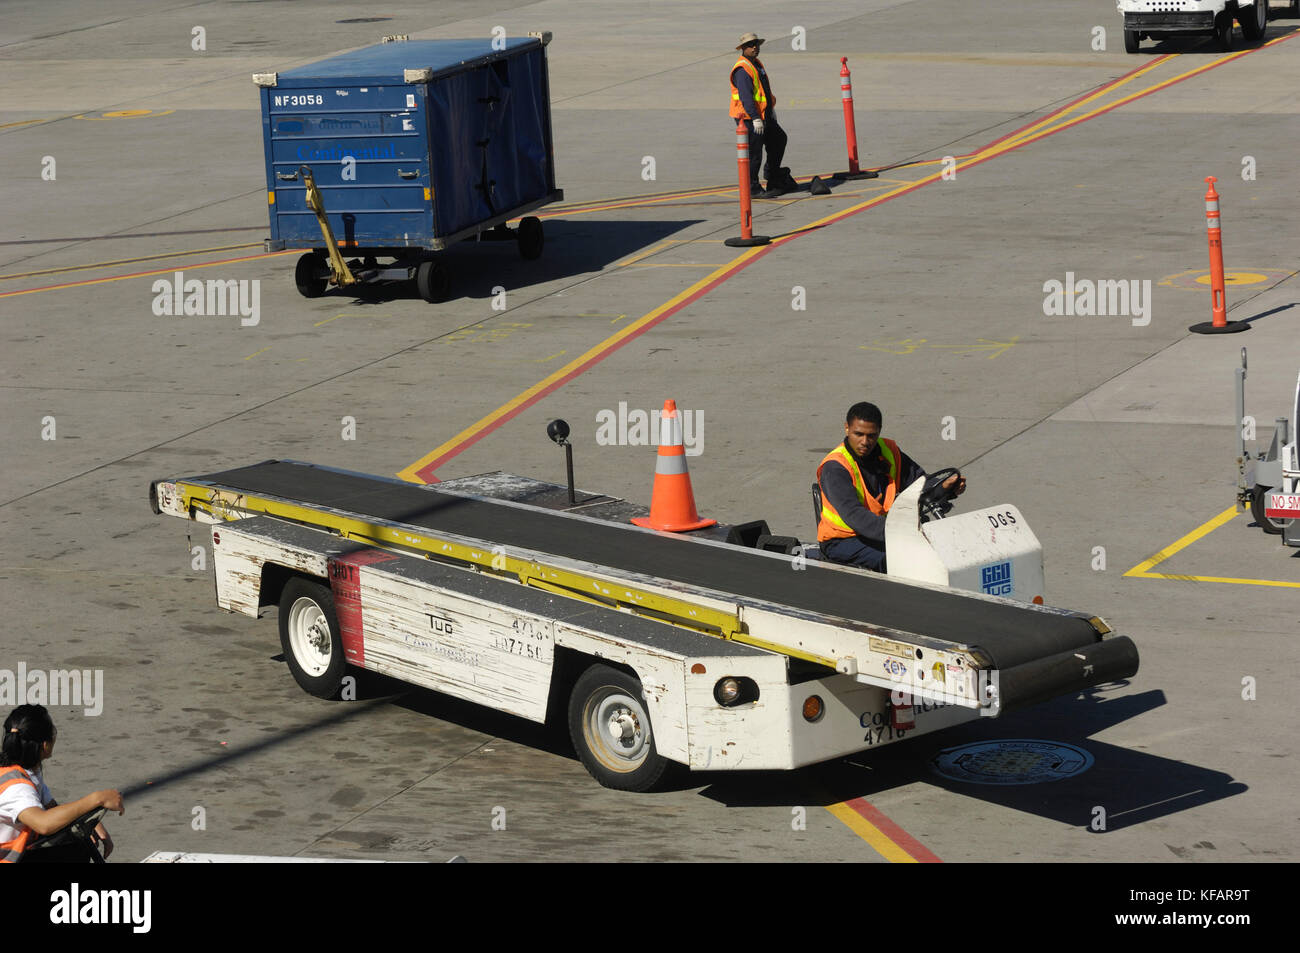 a baggage conveyor-belt truck on the apron Stock Photo - Alamy